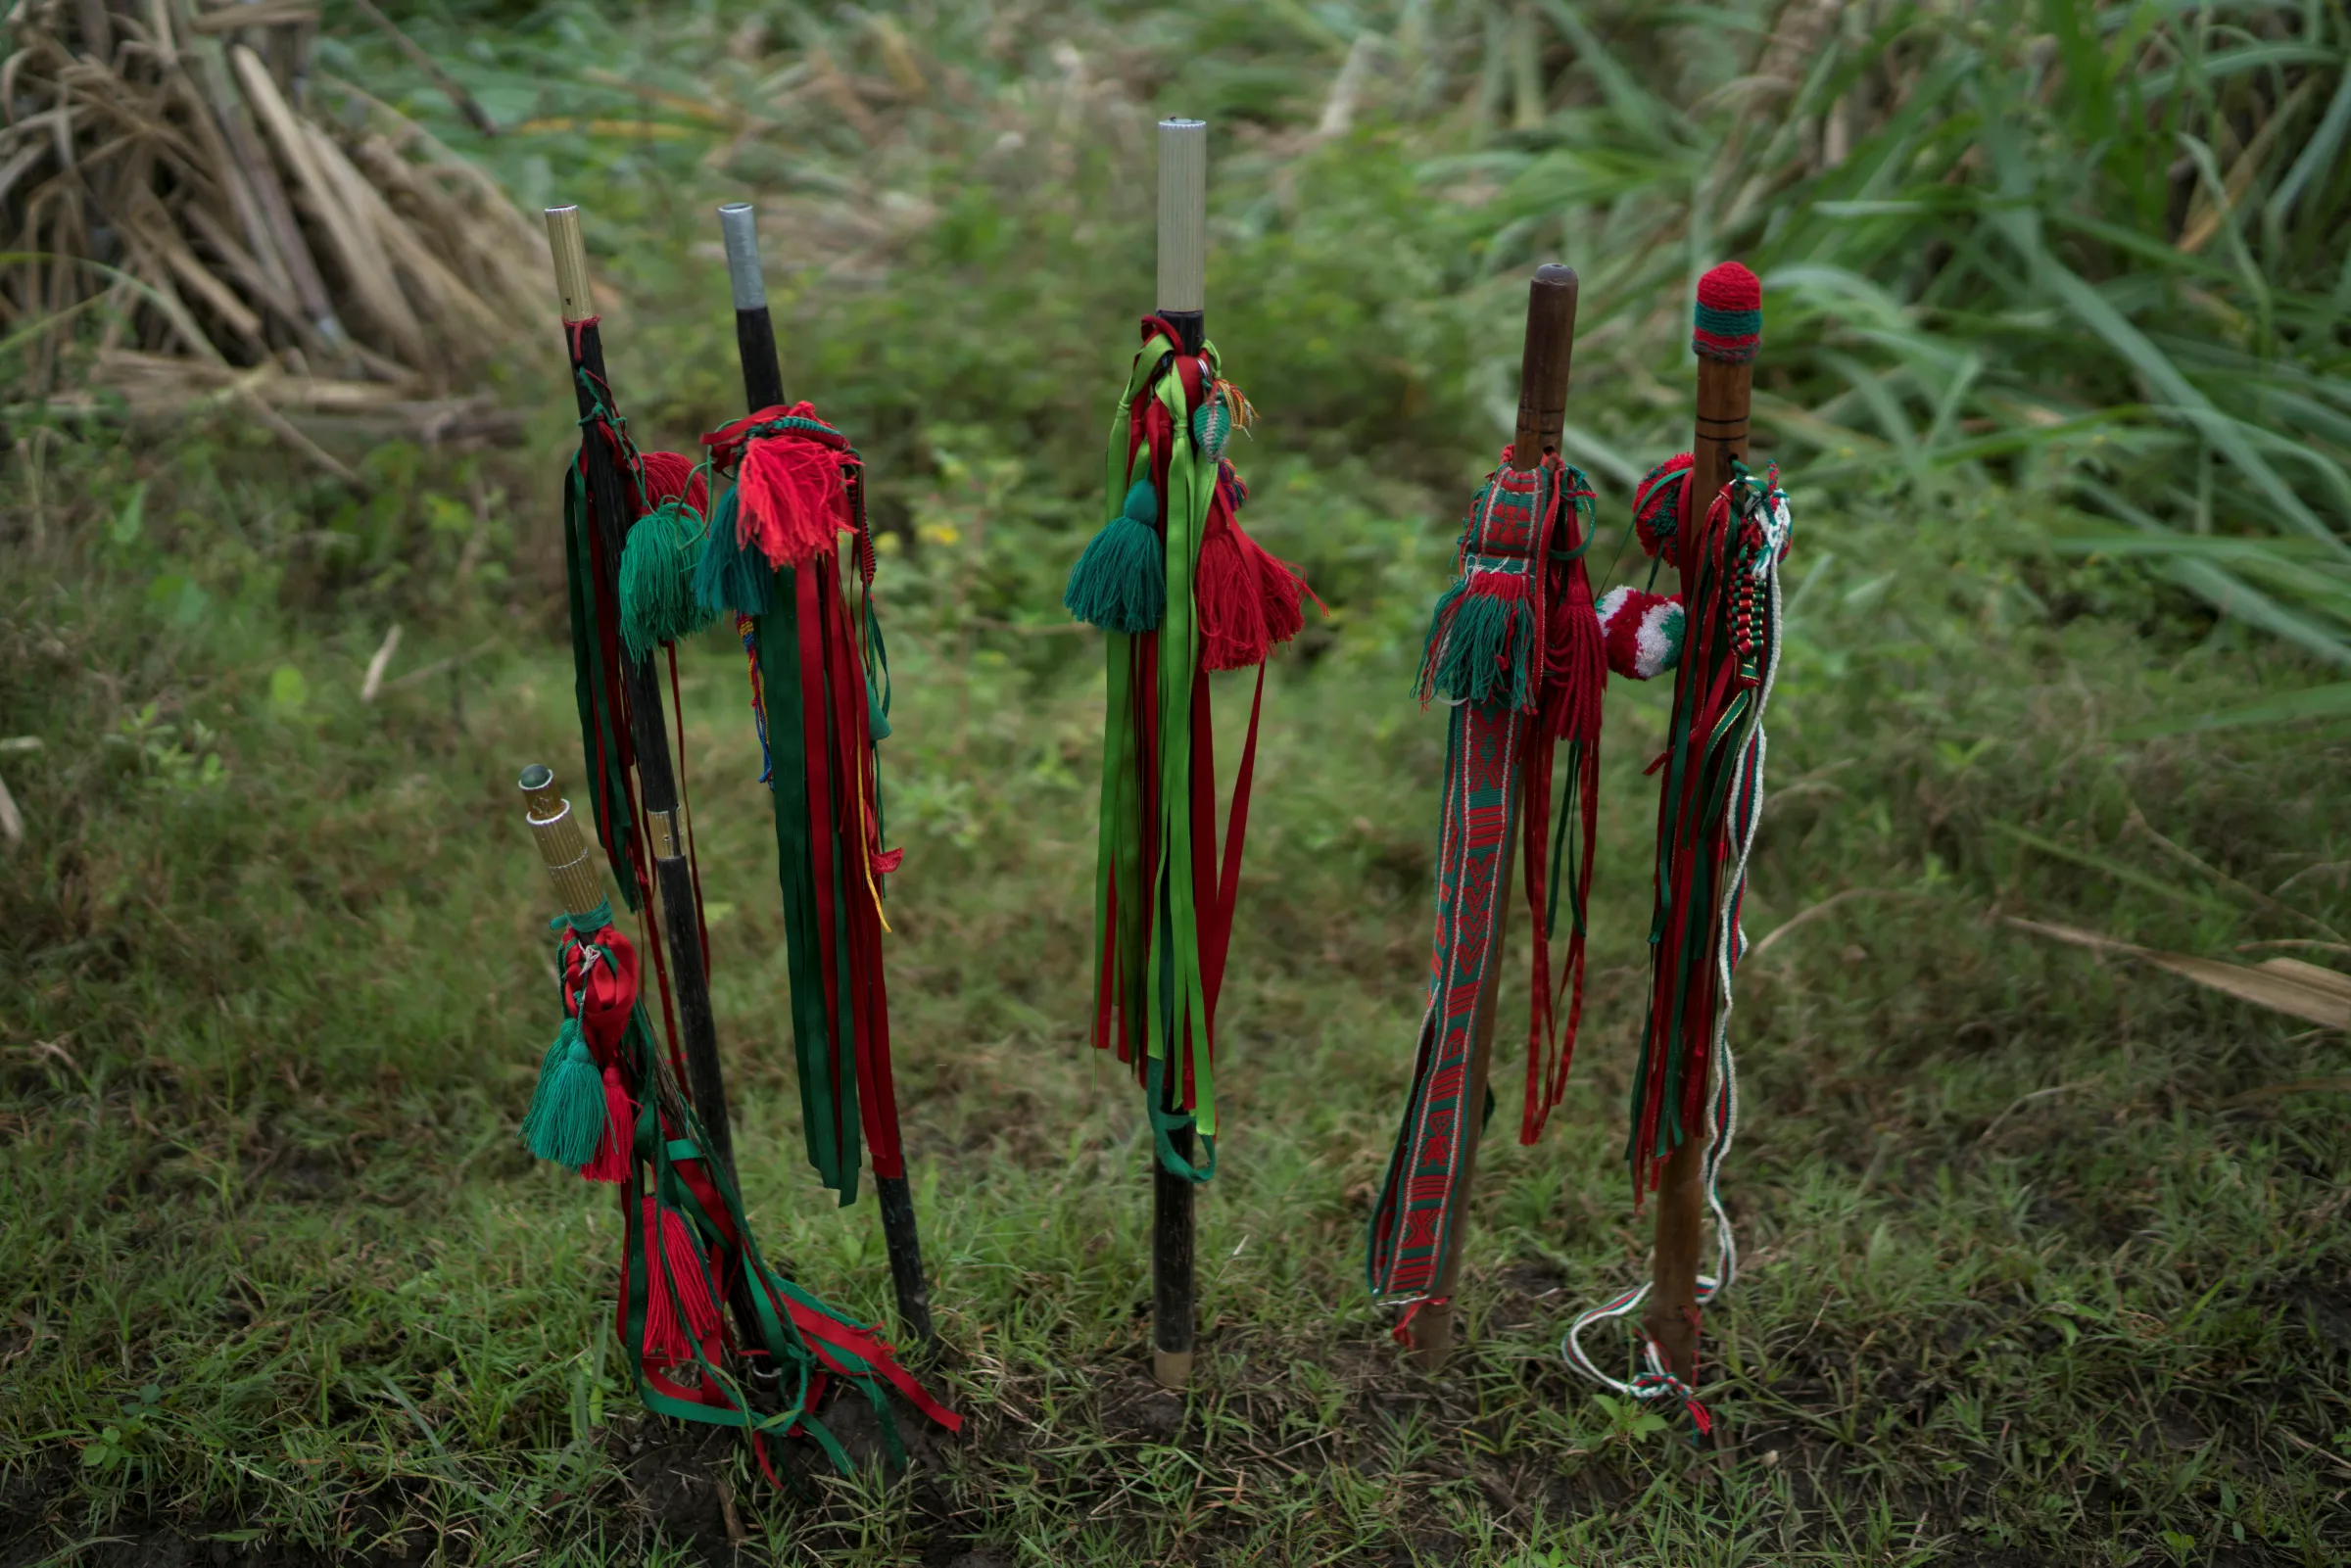 Ceremonial staffs of leaders of the Nasa indigenous tribe are seen at a sugar cane field they claim as their ancestral lands in Corinto, Colombia, May 11, 2017